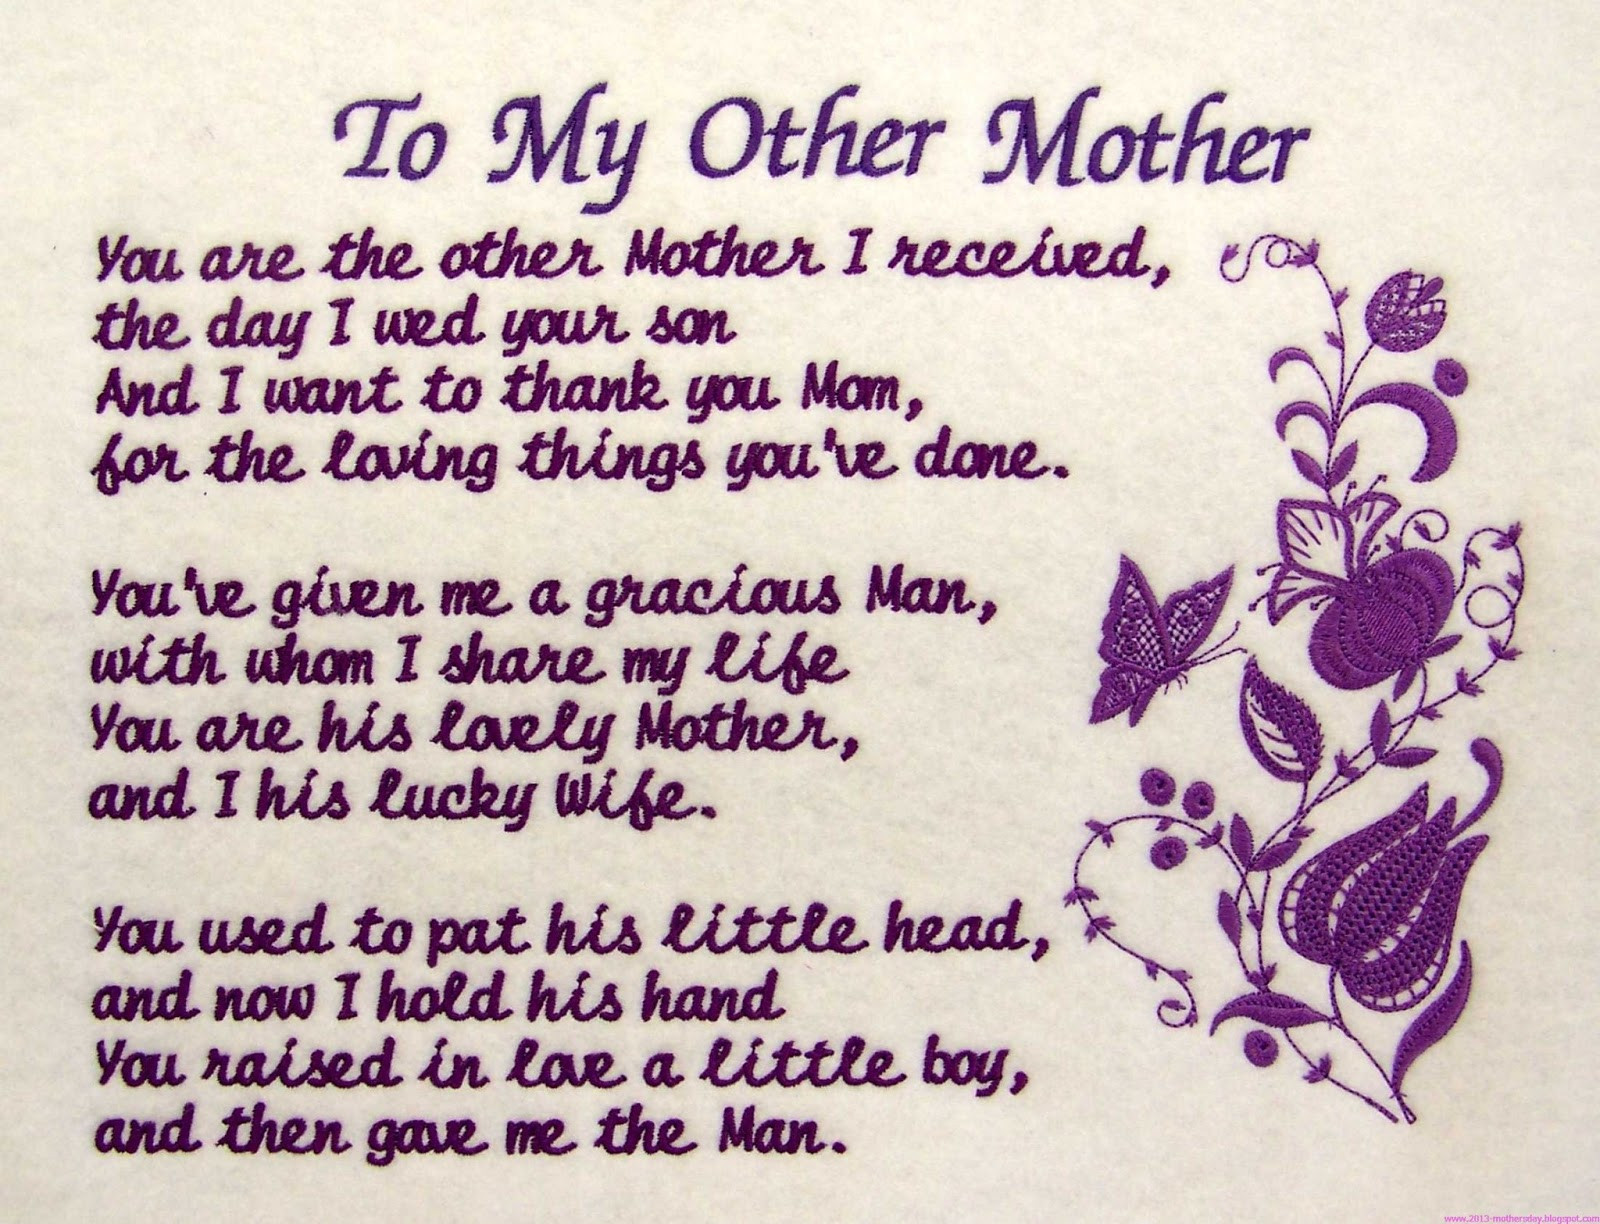 Mothers Day Quotes For Friends
 The 35 All Time Best Happy Mothers Day Quotes